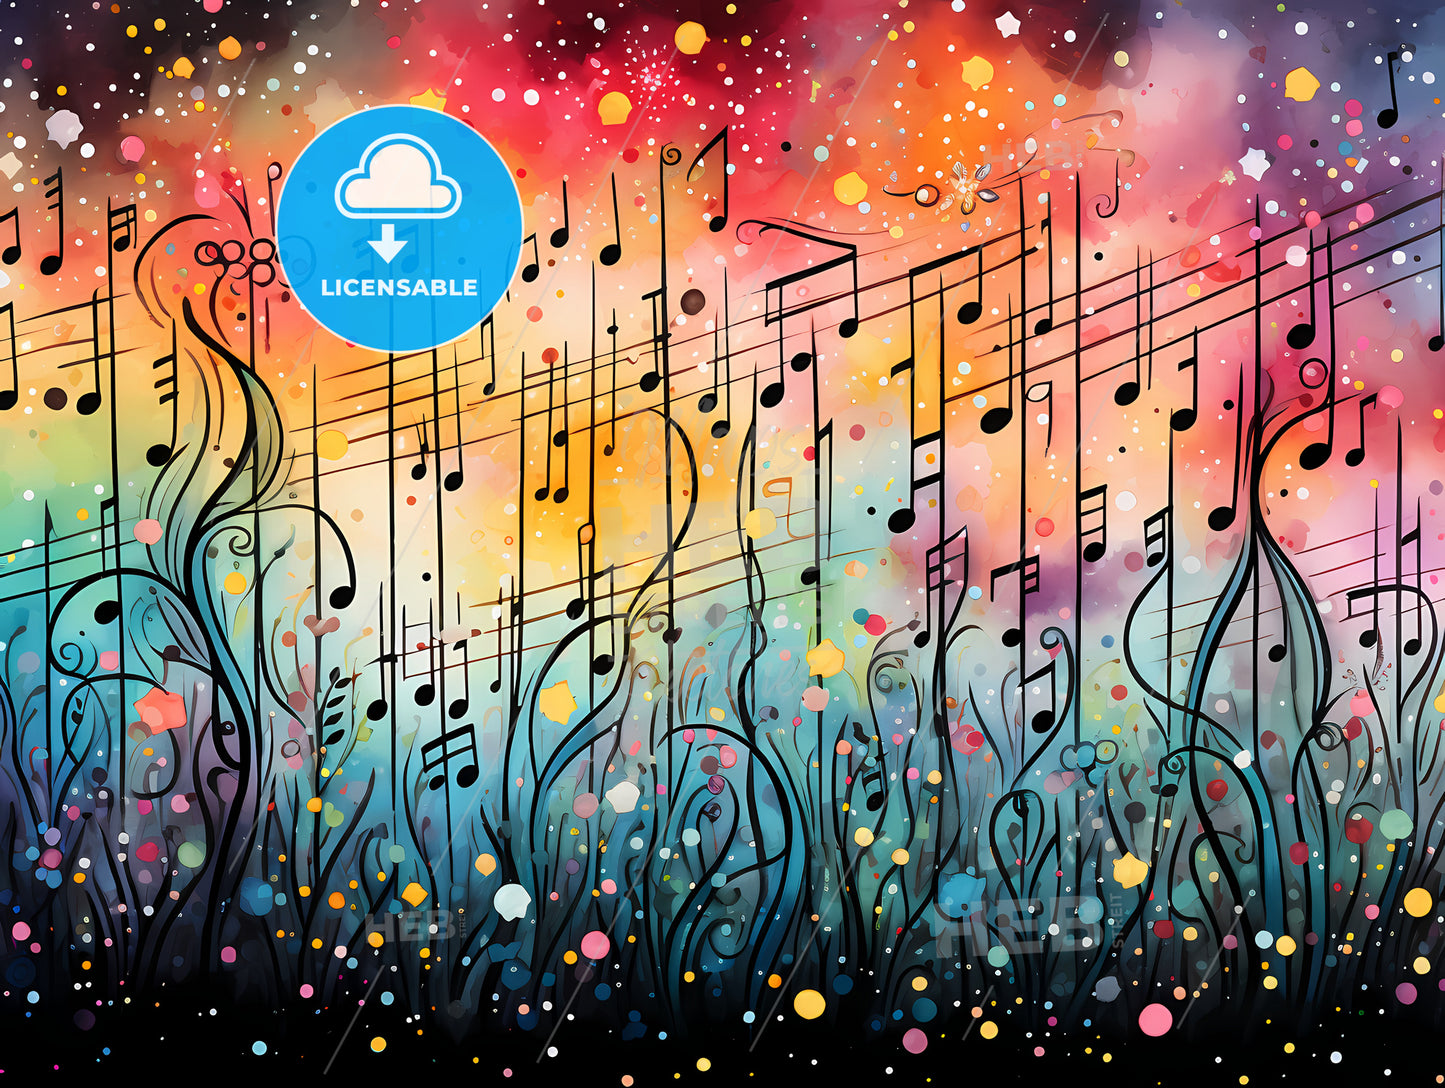 A Colorful Art Of Music Notes